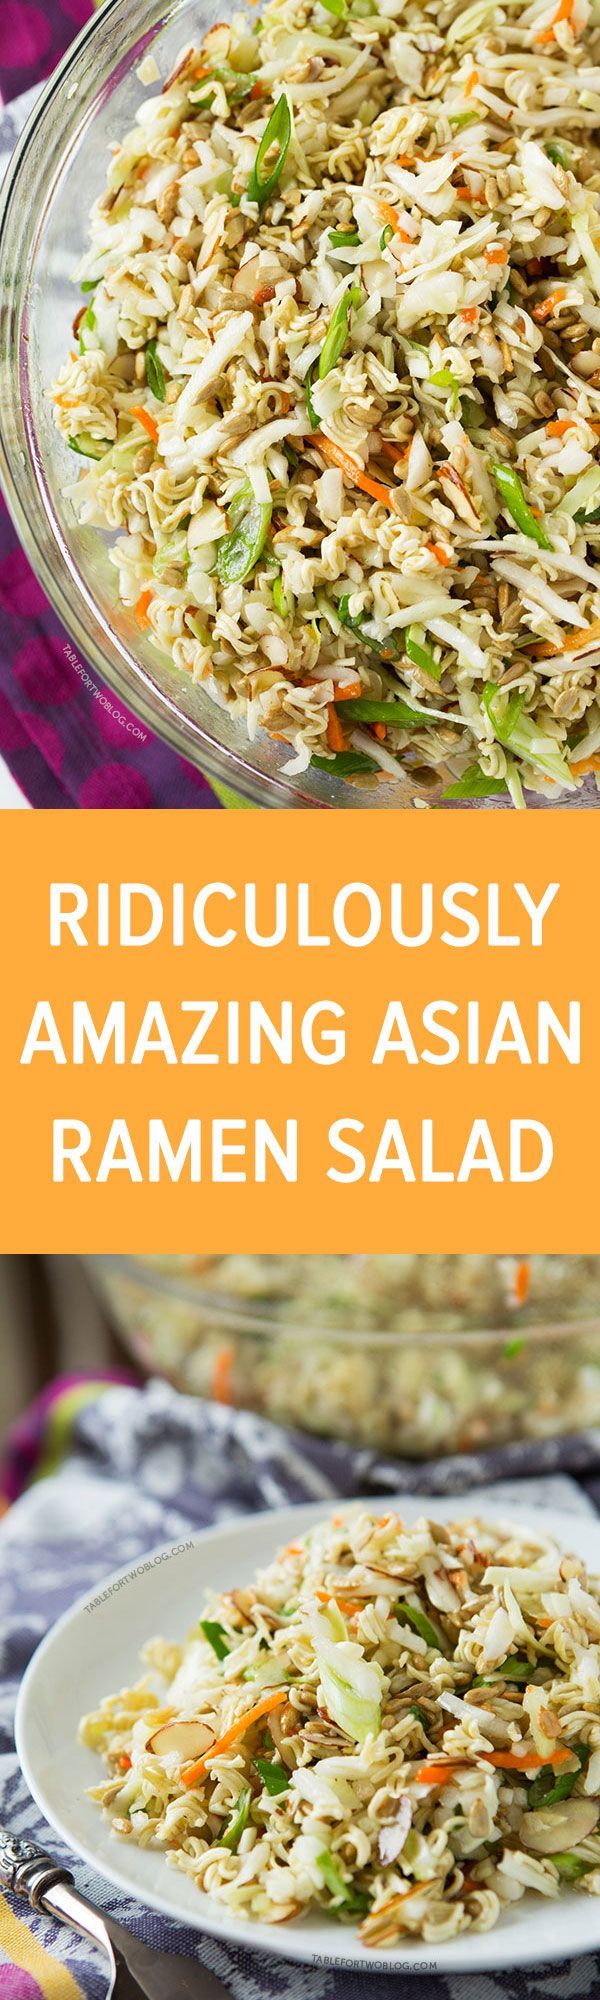 This ridiculously amazing Asian ramen salad will have you and your guests going back for thirds and fourths. Everyone will be